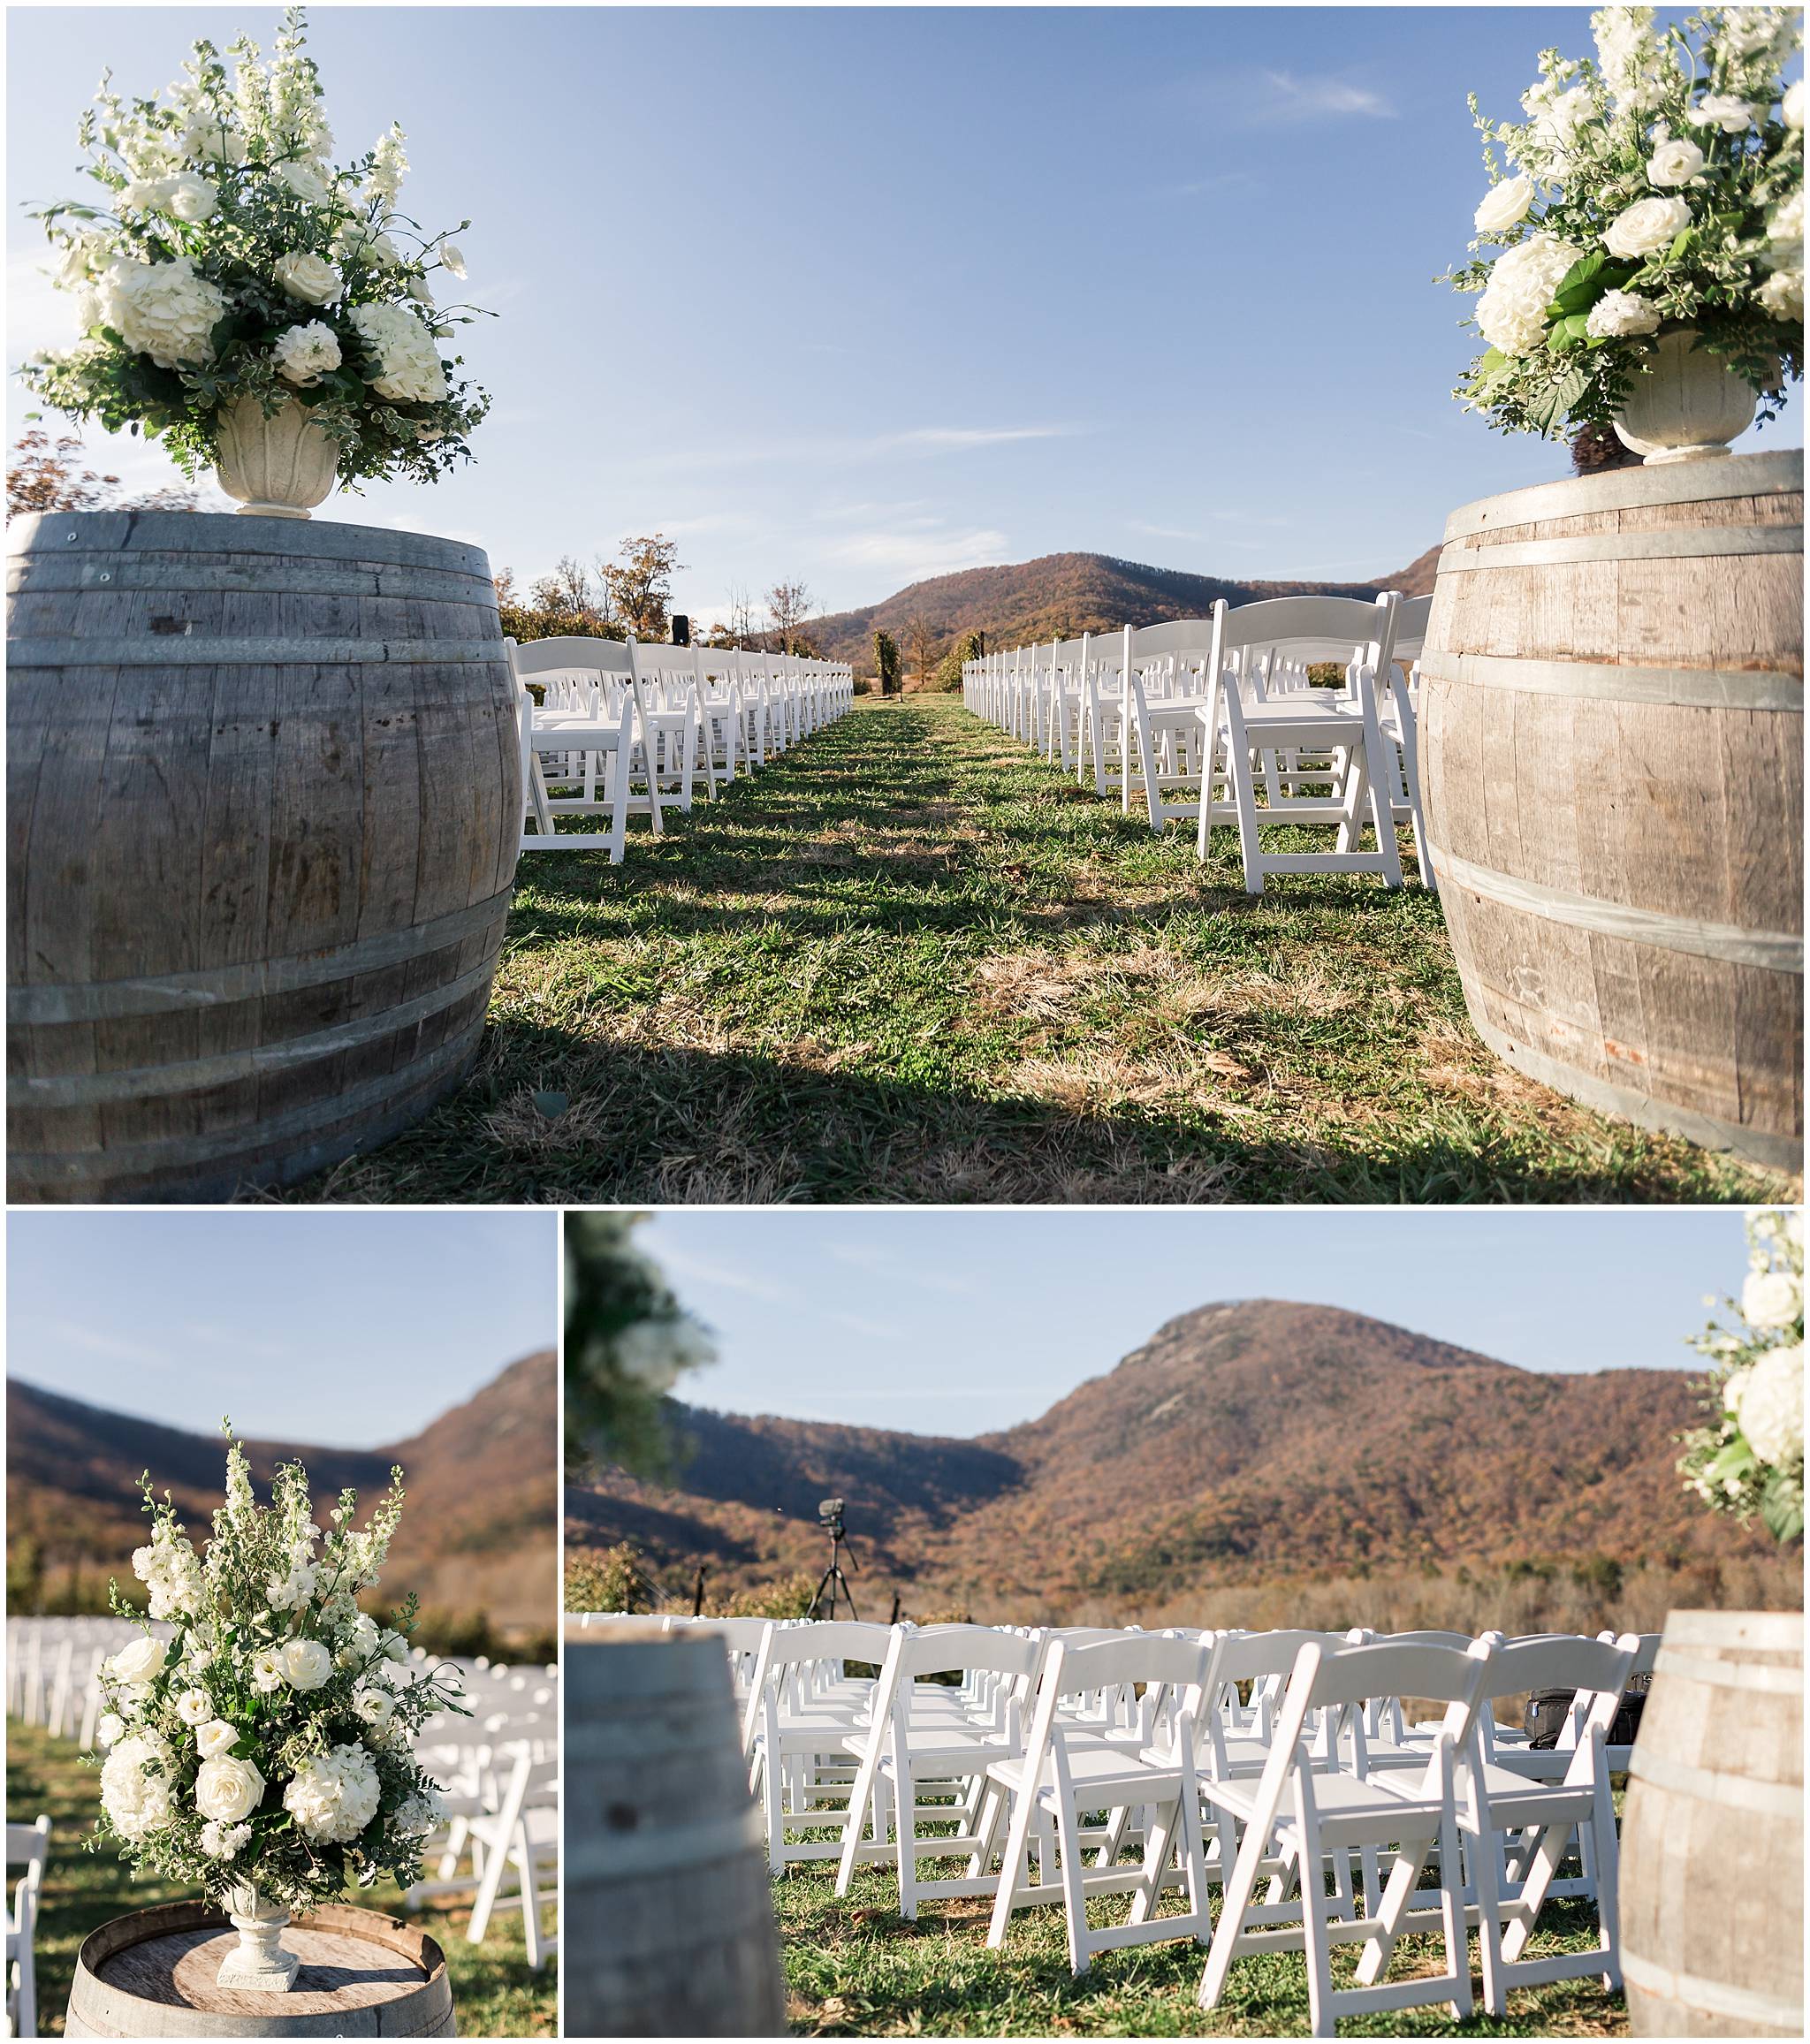 Yonah Mountain Vineyards Ceremony Pictures photographers cleveland, ga